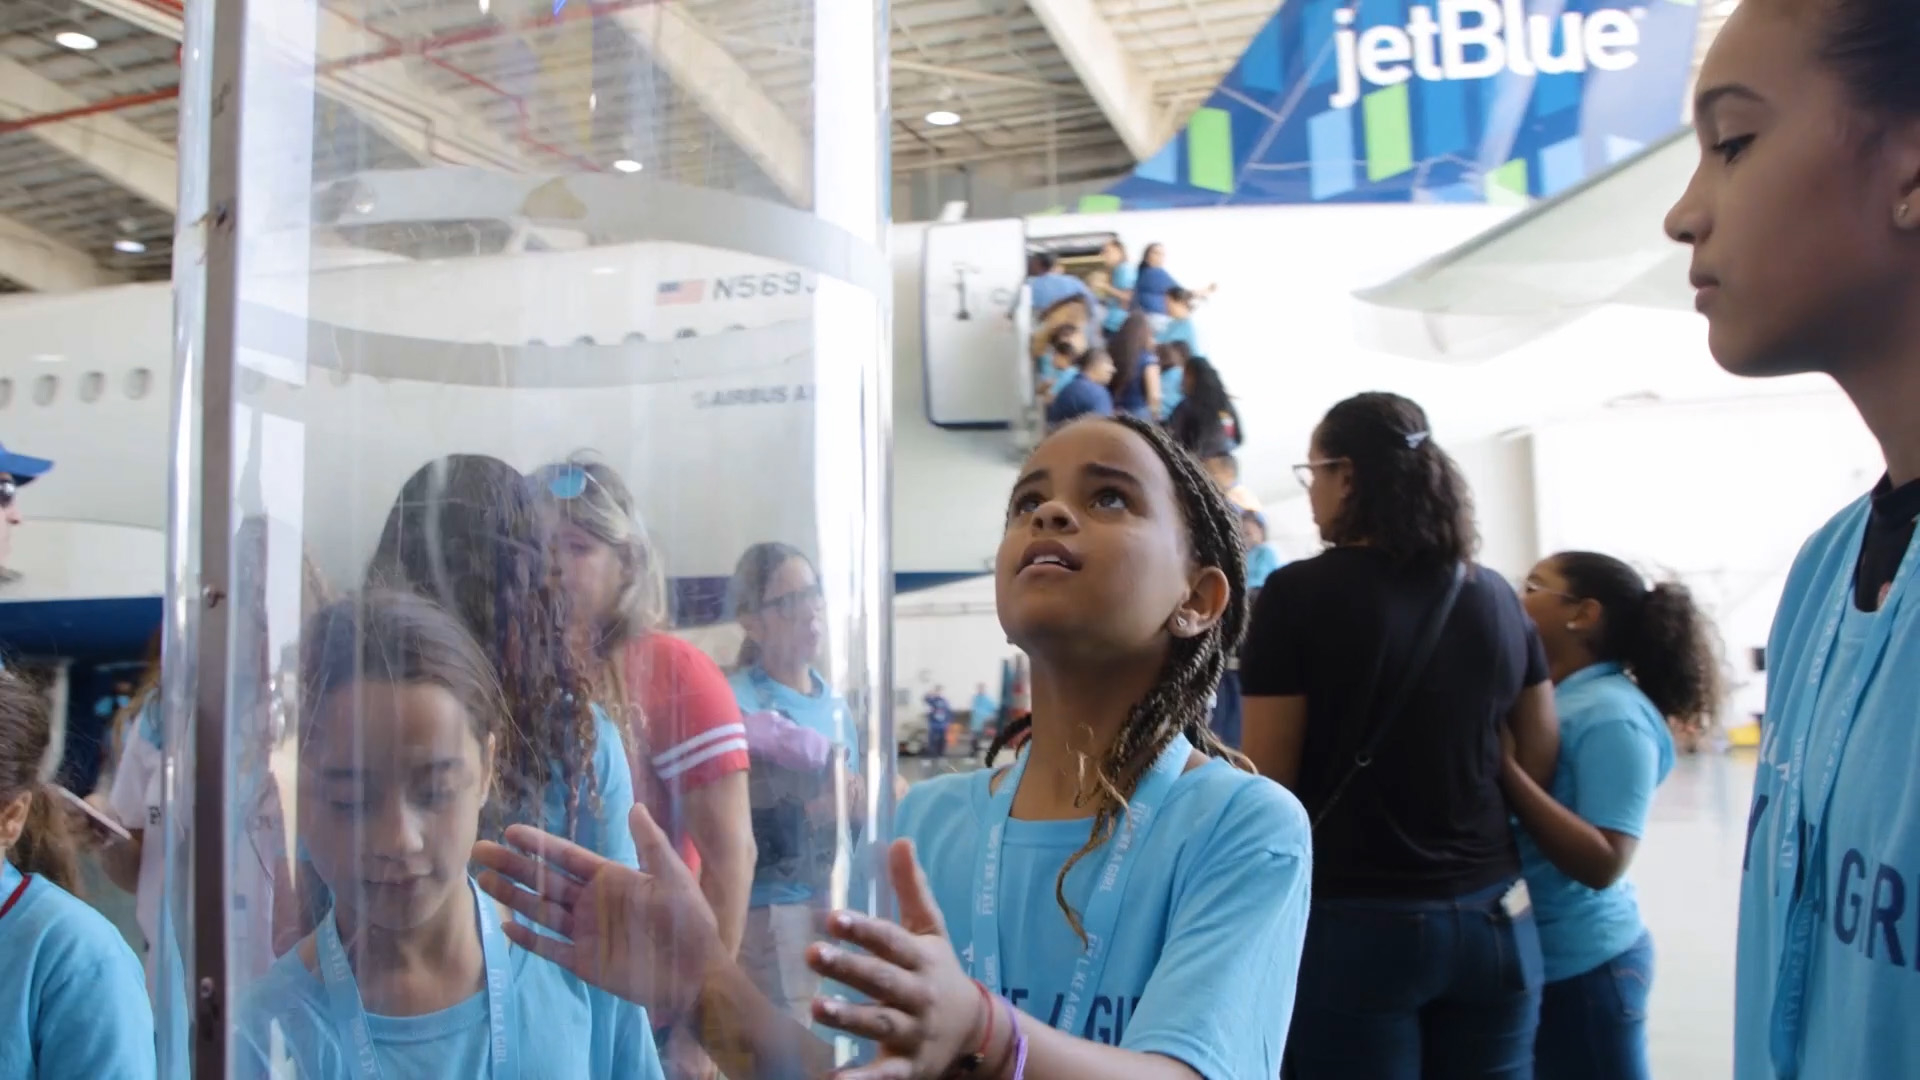 Video courtesy of JetBlue and the JetBlue Foundation.